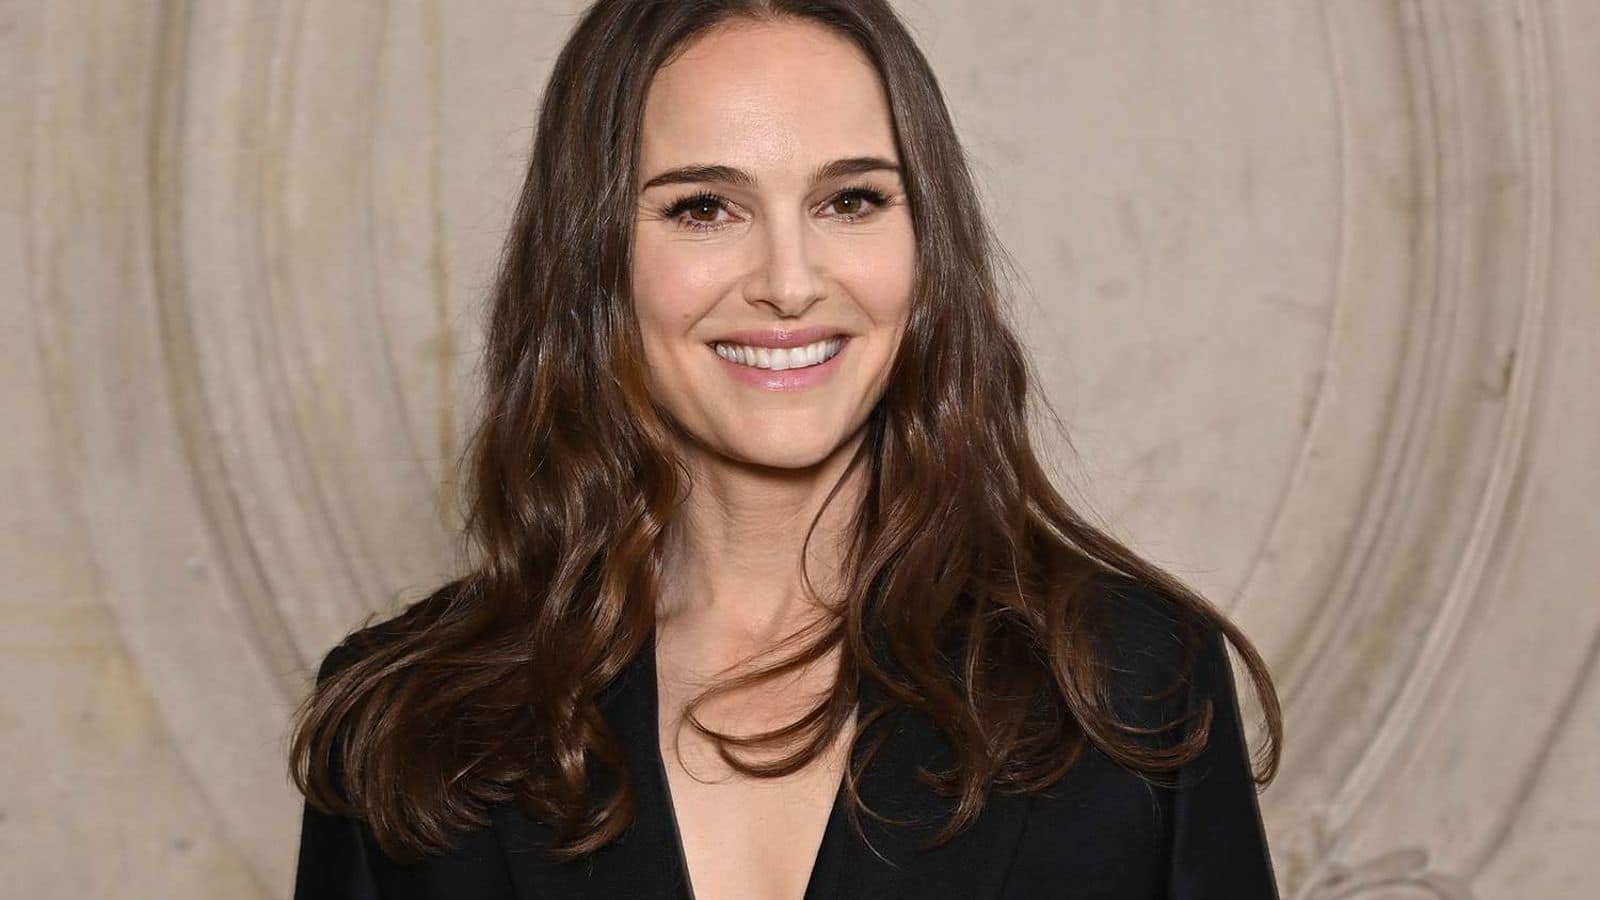 Natalie Portman thanks friends who uplifted her 'again and again'